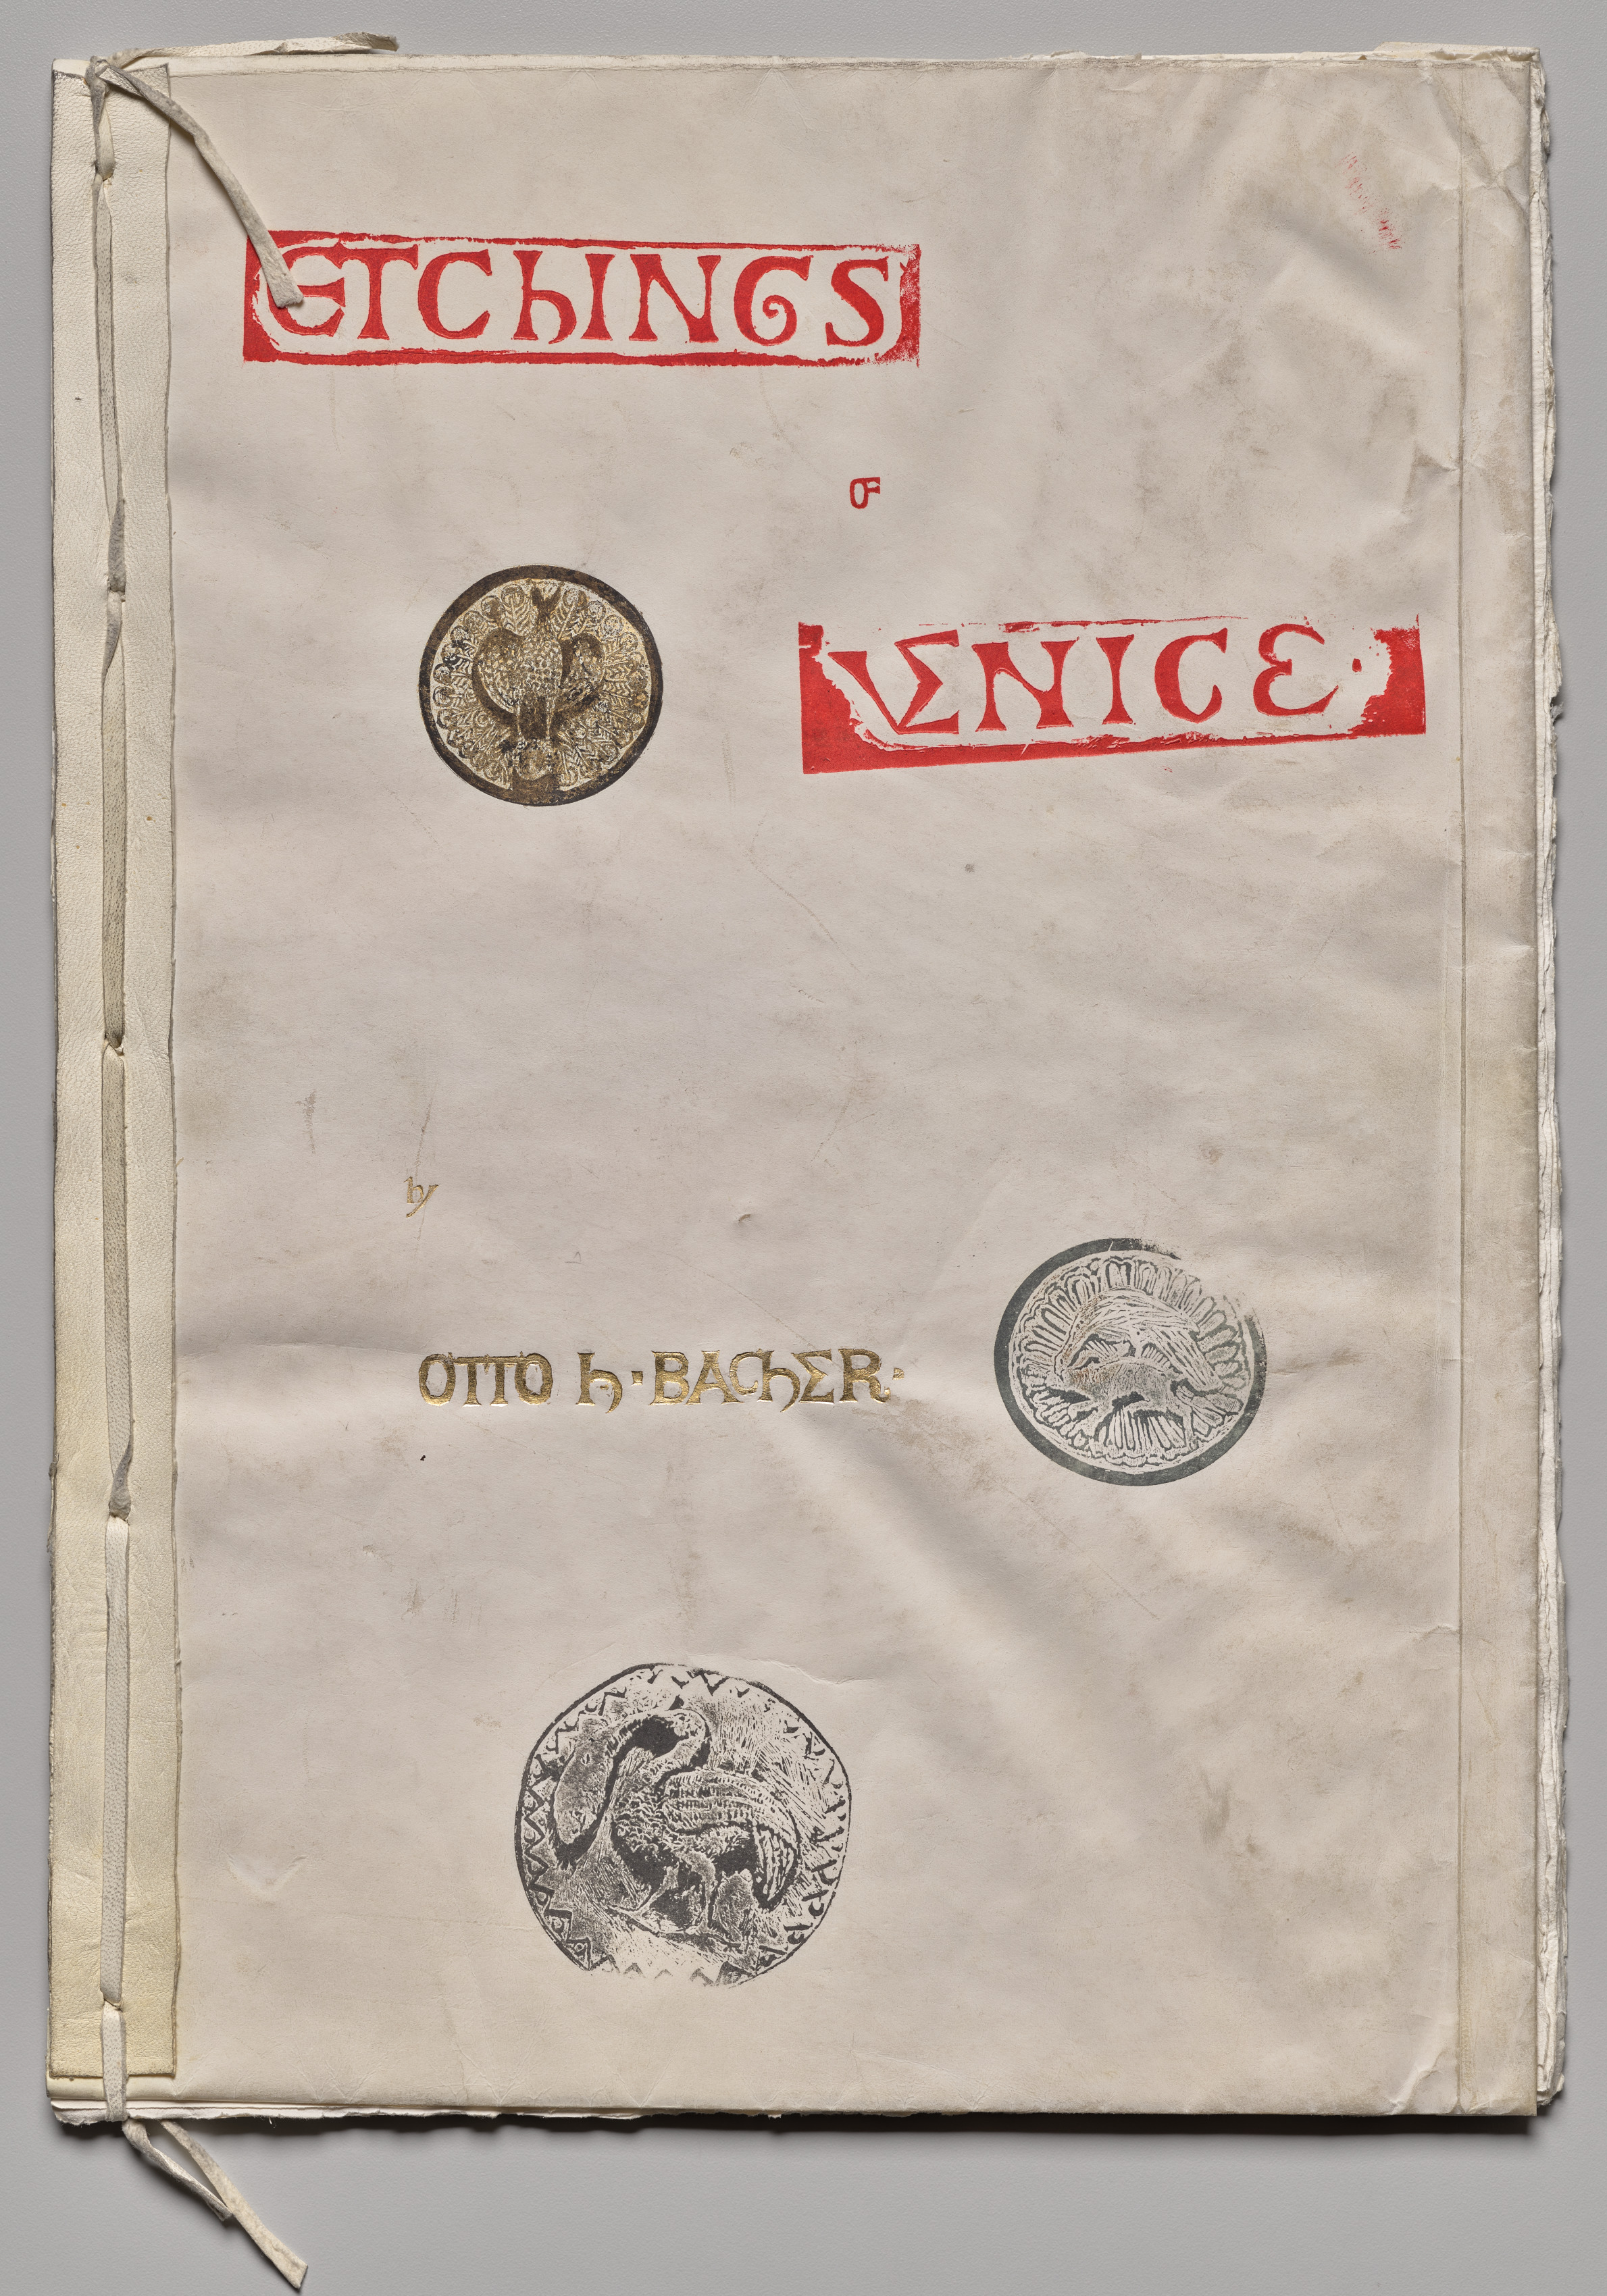 Etchings of Venice: Cover and Title Page